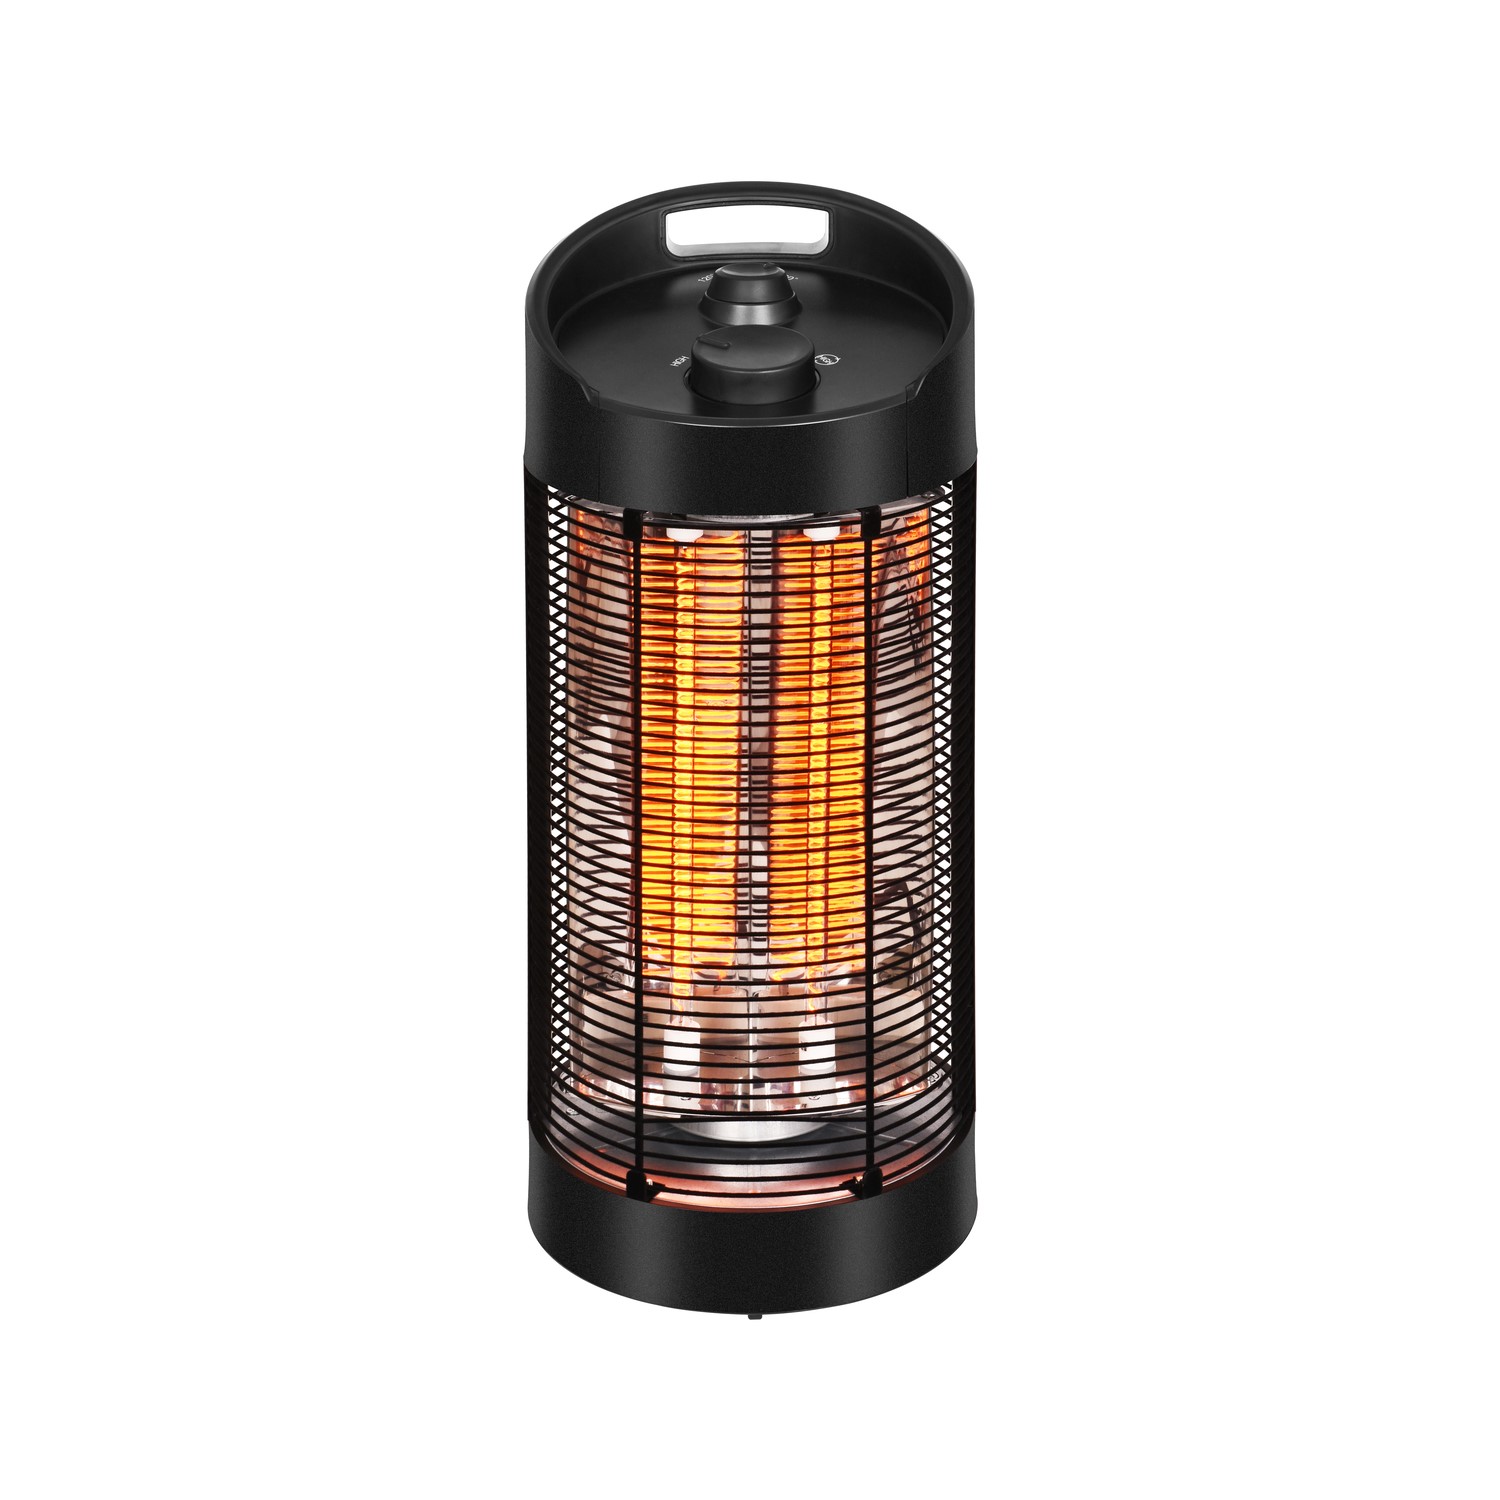 Electriq Table Top Electric Patio, Table Top Patio Heater Electric In Stock